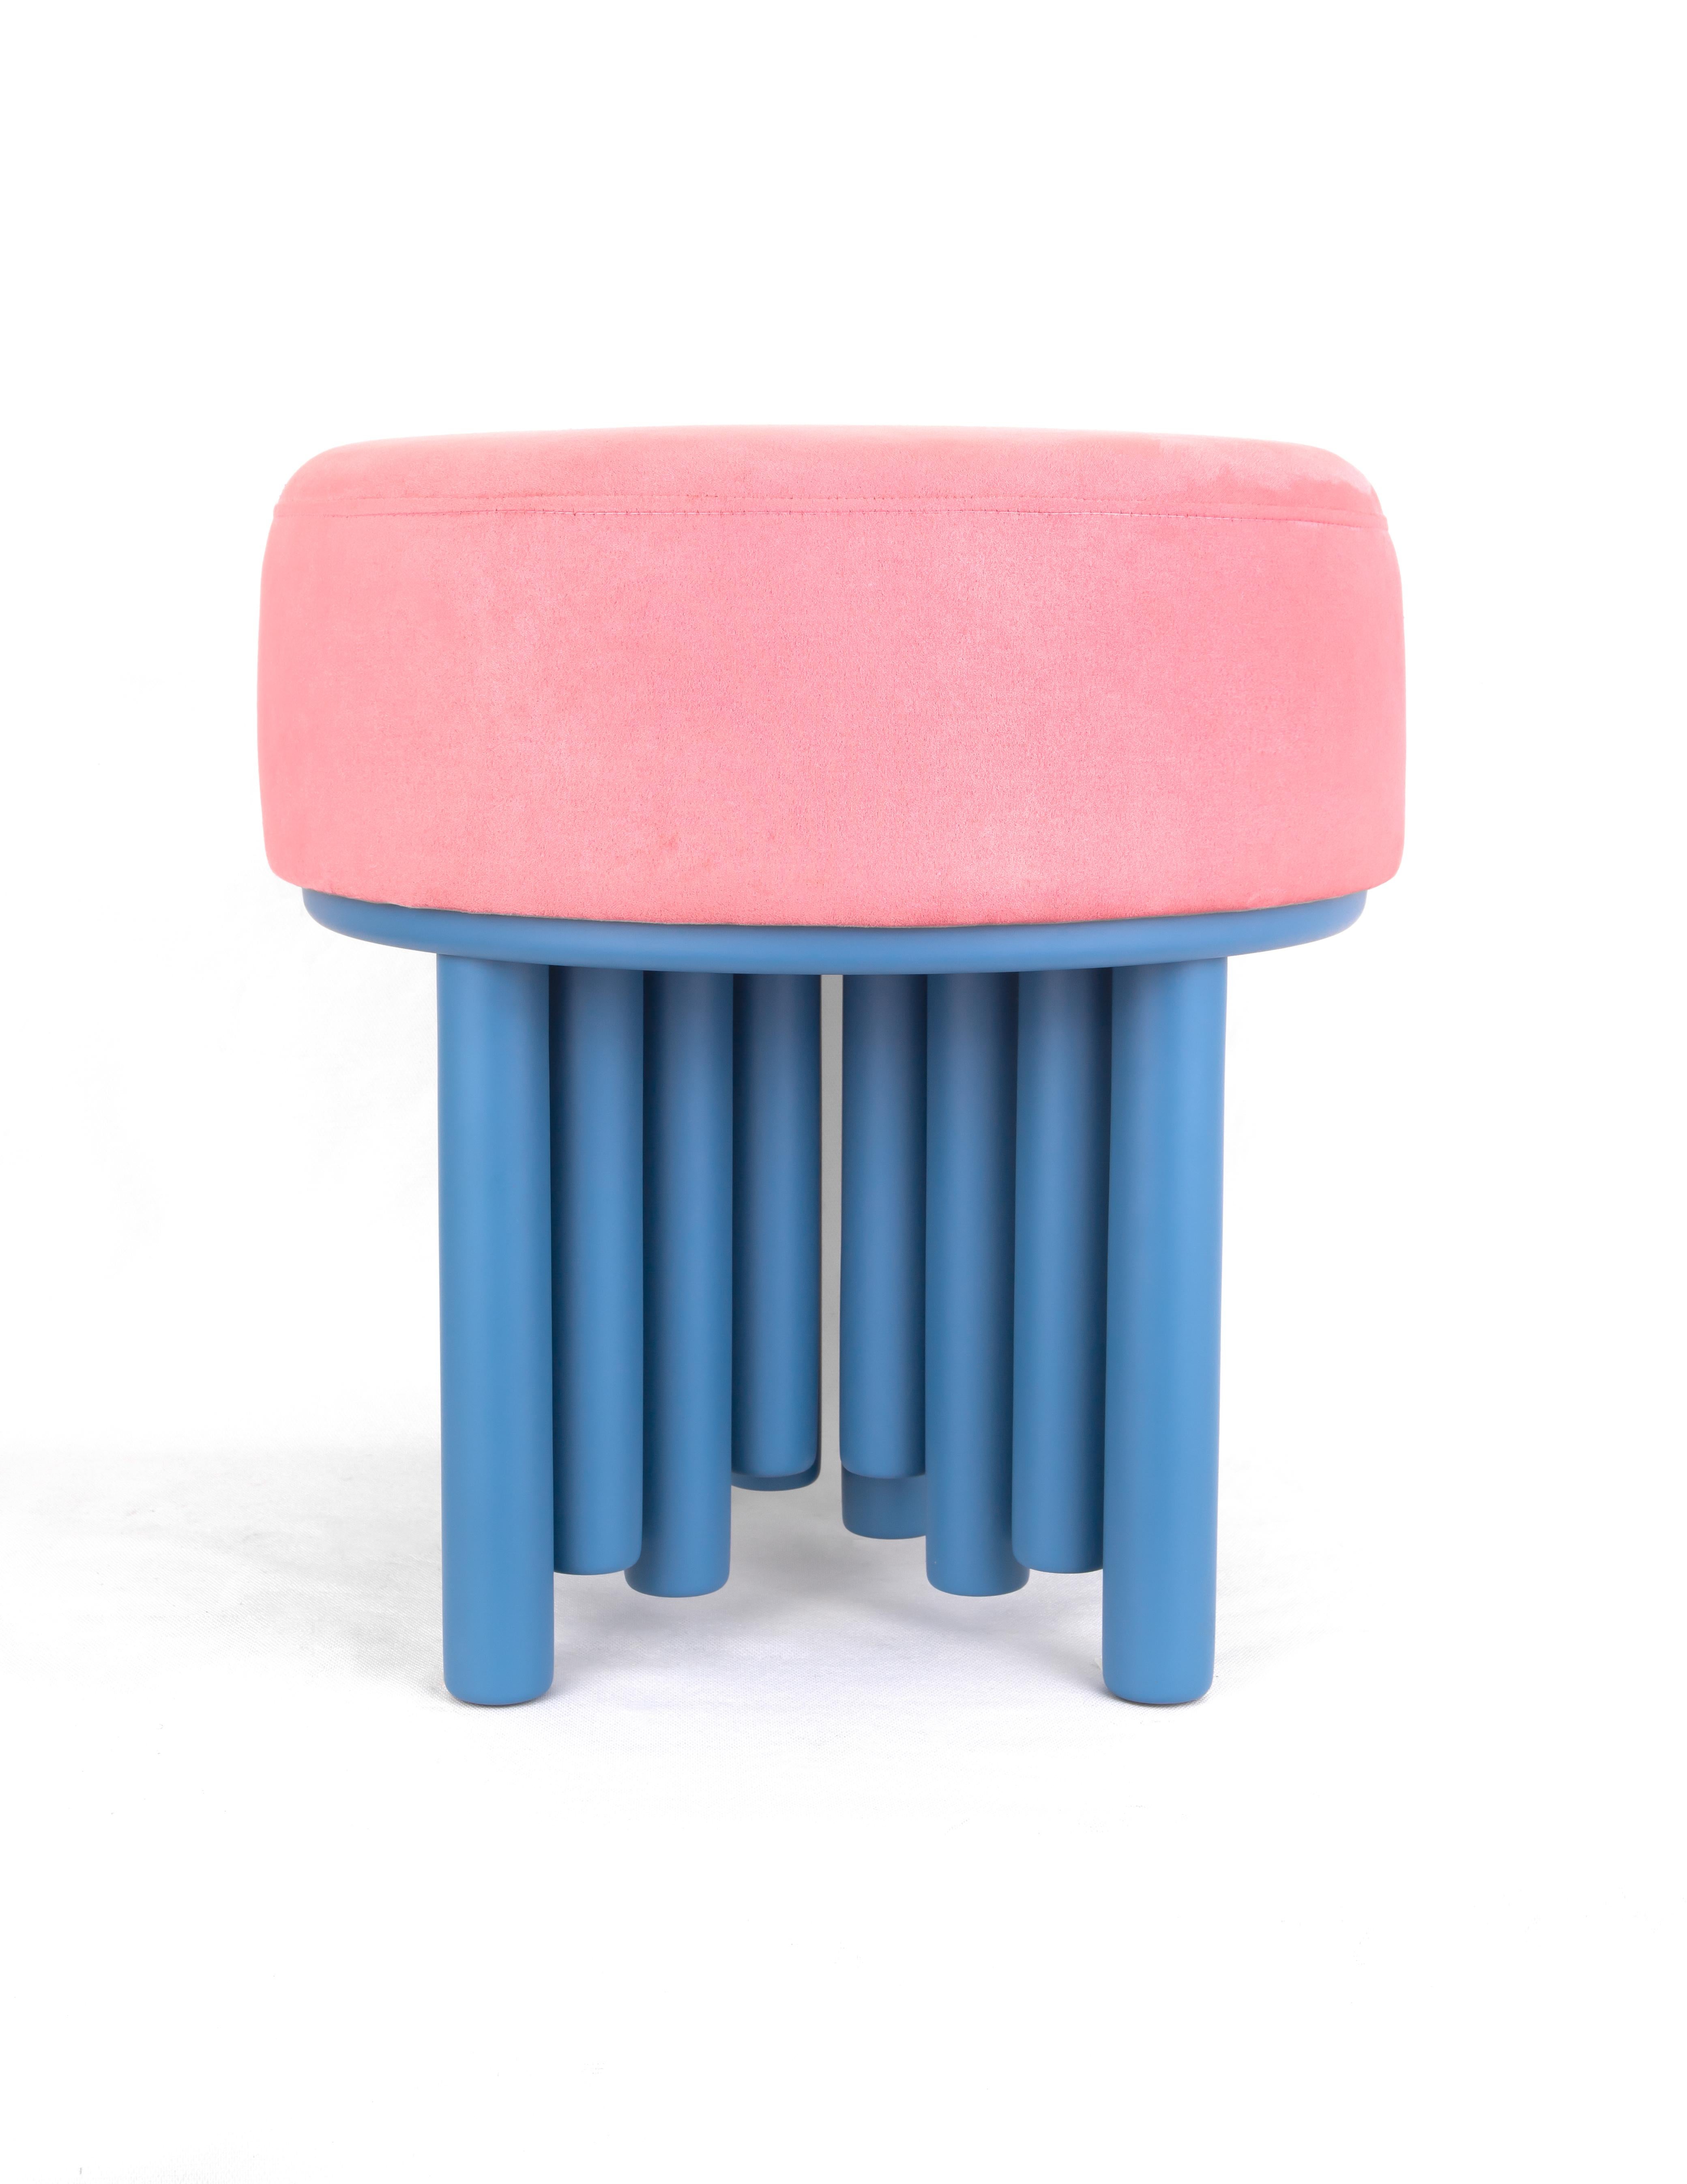 
Accent Stool Éfira

Base made of solid wood with a satin-finished lacquer in blue color.
Upholstered with foam covered in pink velvet fabric.

The Éfira pouf is a unique and interesting piece of furniture, with a creative inspiration from